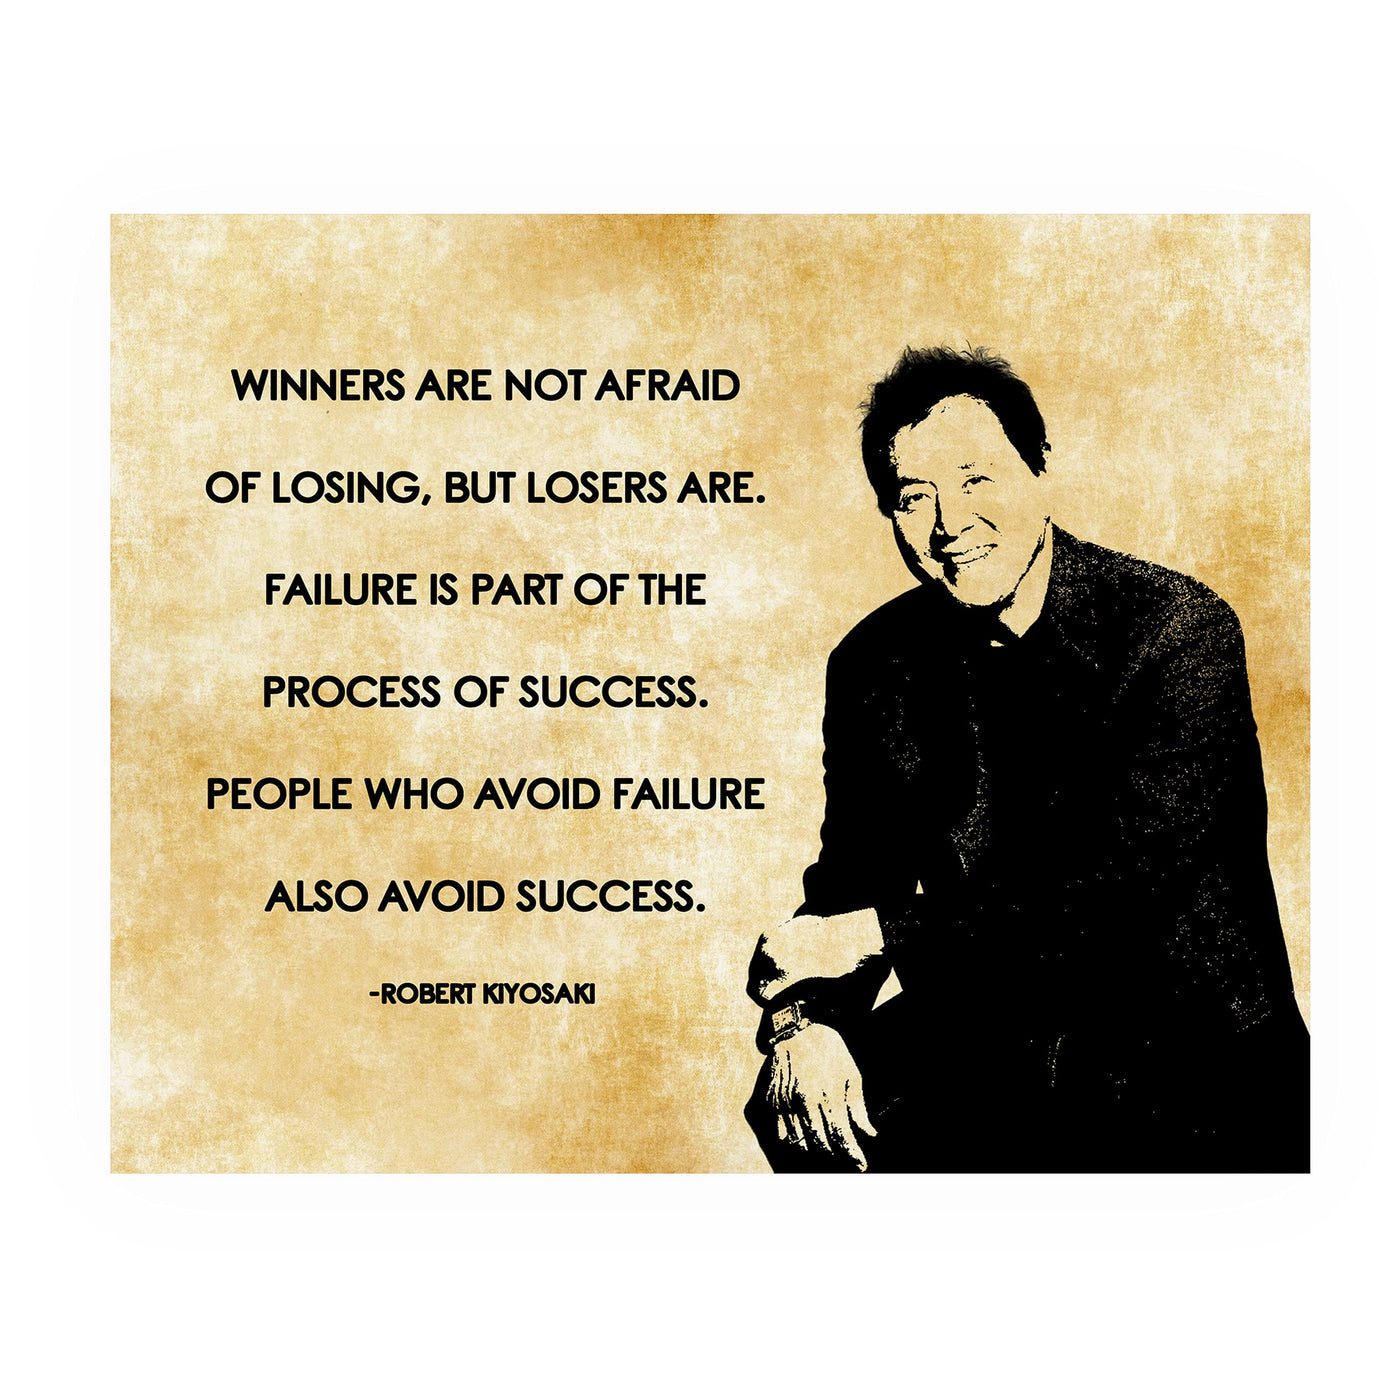 Robert Kiyosaki-"Winners Are Not Afraid of Losing"-Motivational Quotes Wall Sign-10 x 8" Typographic Art Print-Ready to Frame. Home-Office-School-Business Decor. Great Tips for Motivation & Success!